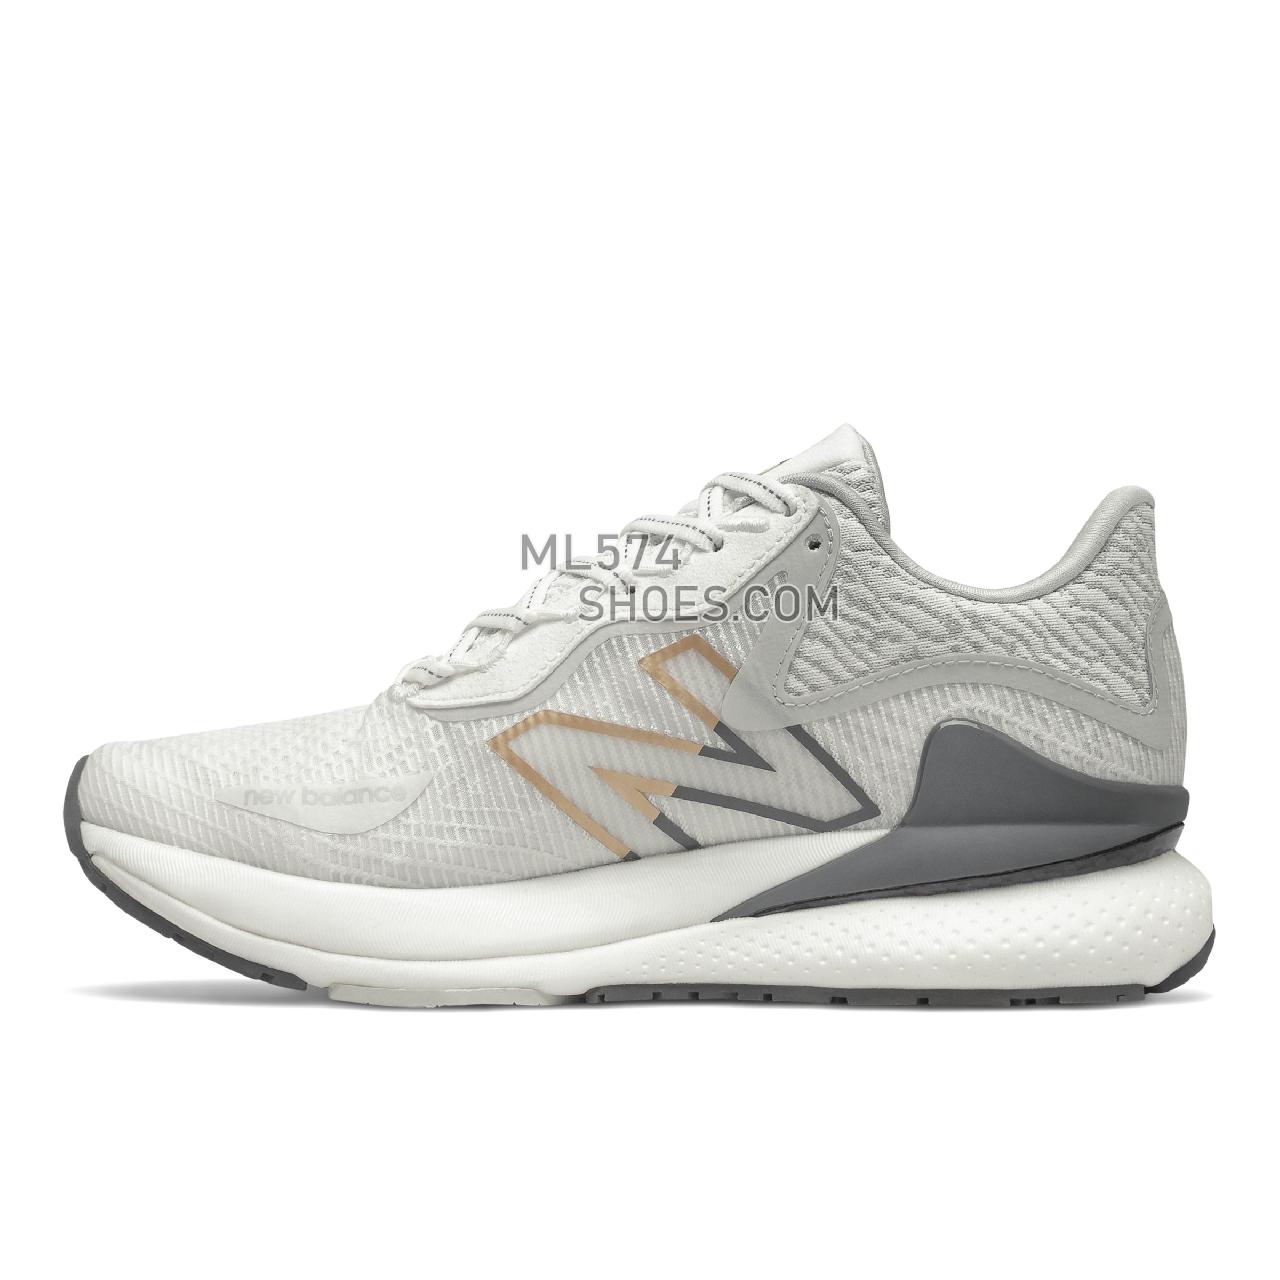 New Balance Lerato - Women's Neutral Running - White with Astral Glow - WLERAWP